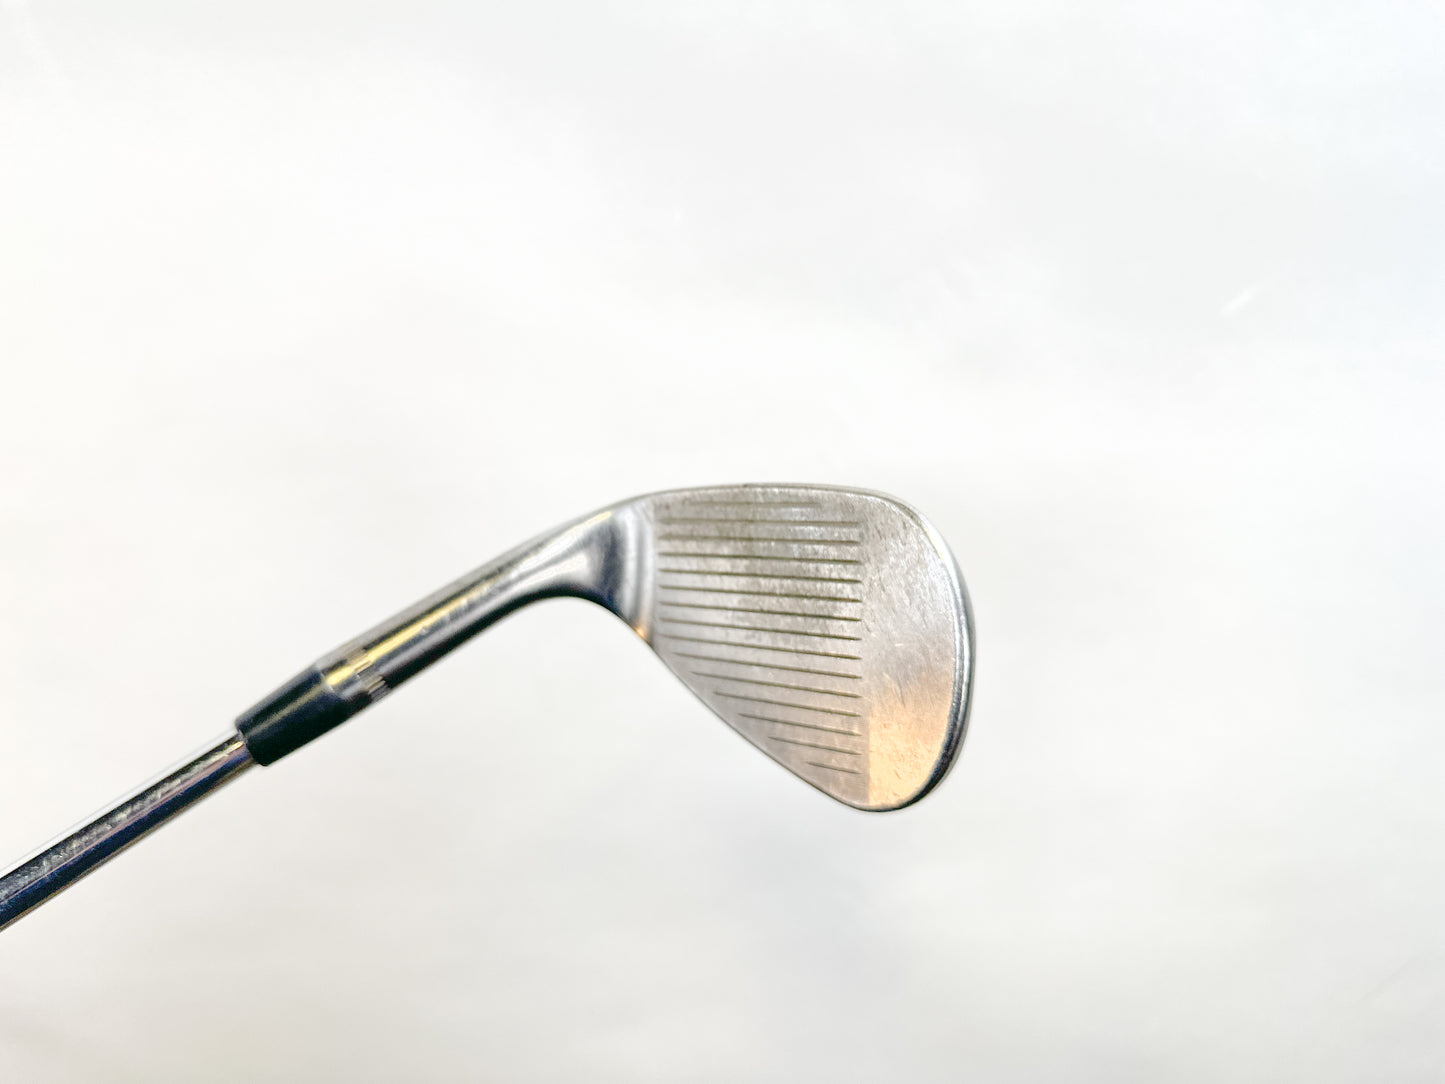 Used Callaway MD5 JAWS Tour Grey S Grind Sand Wedge - Right-Handed - 56 Degrees - Stiff Flex-Next Round